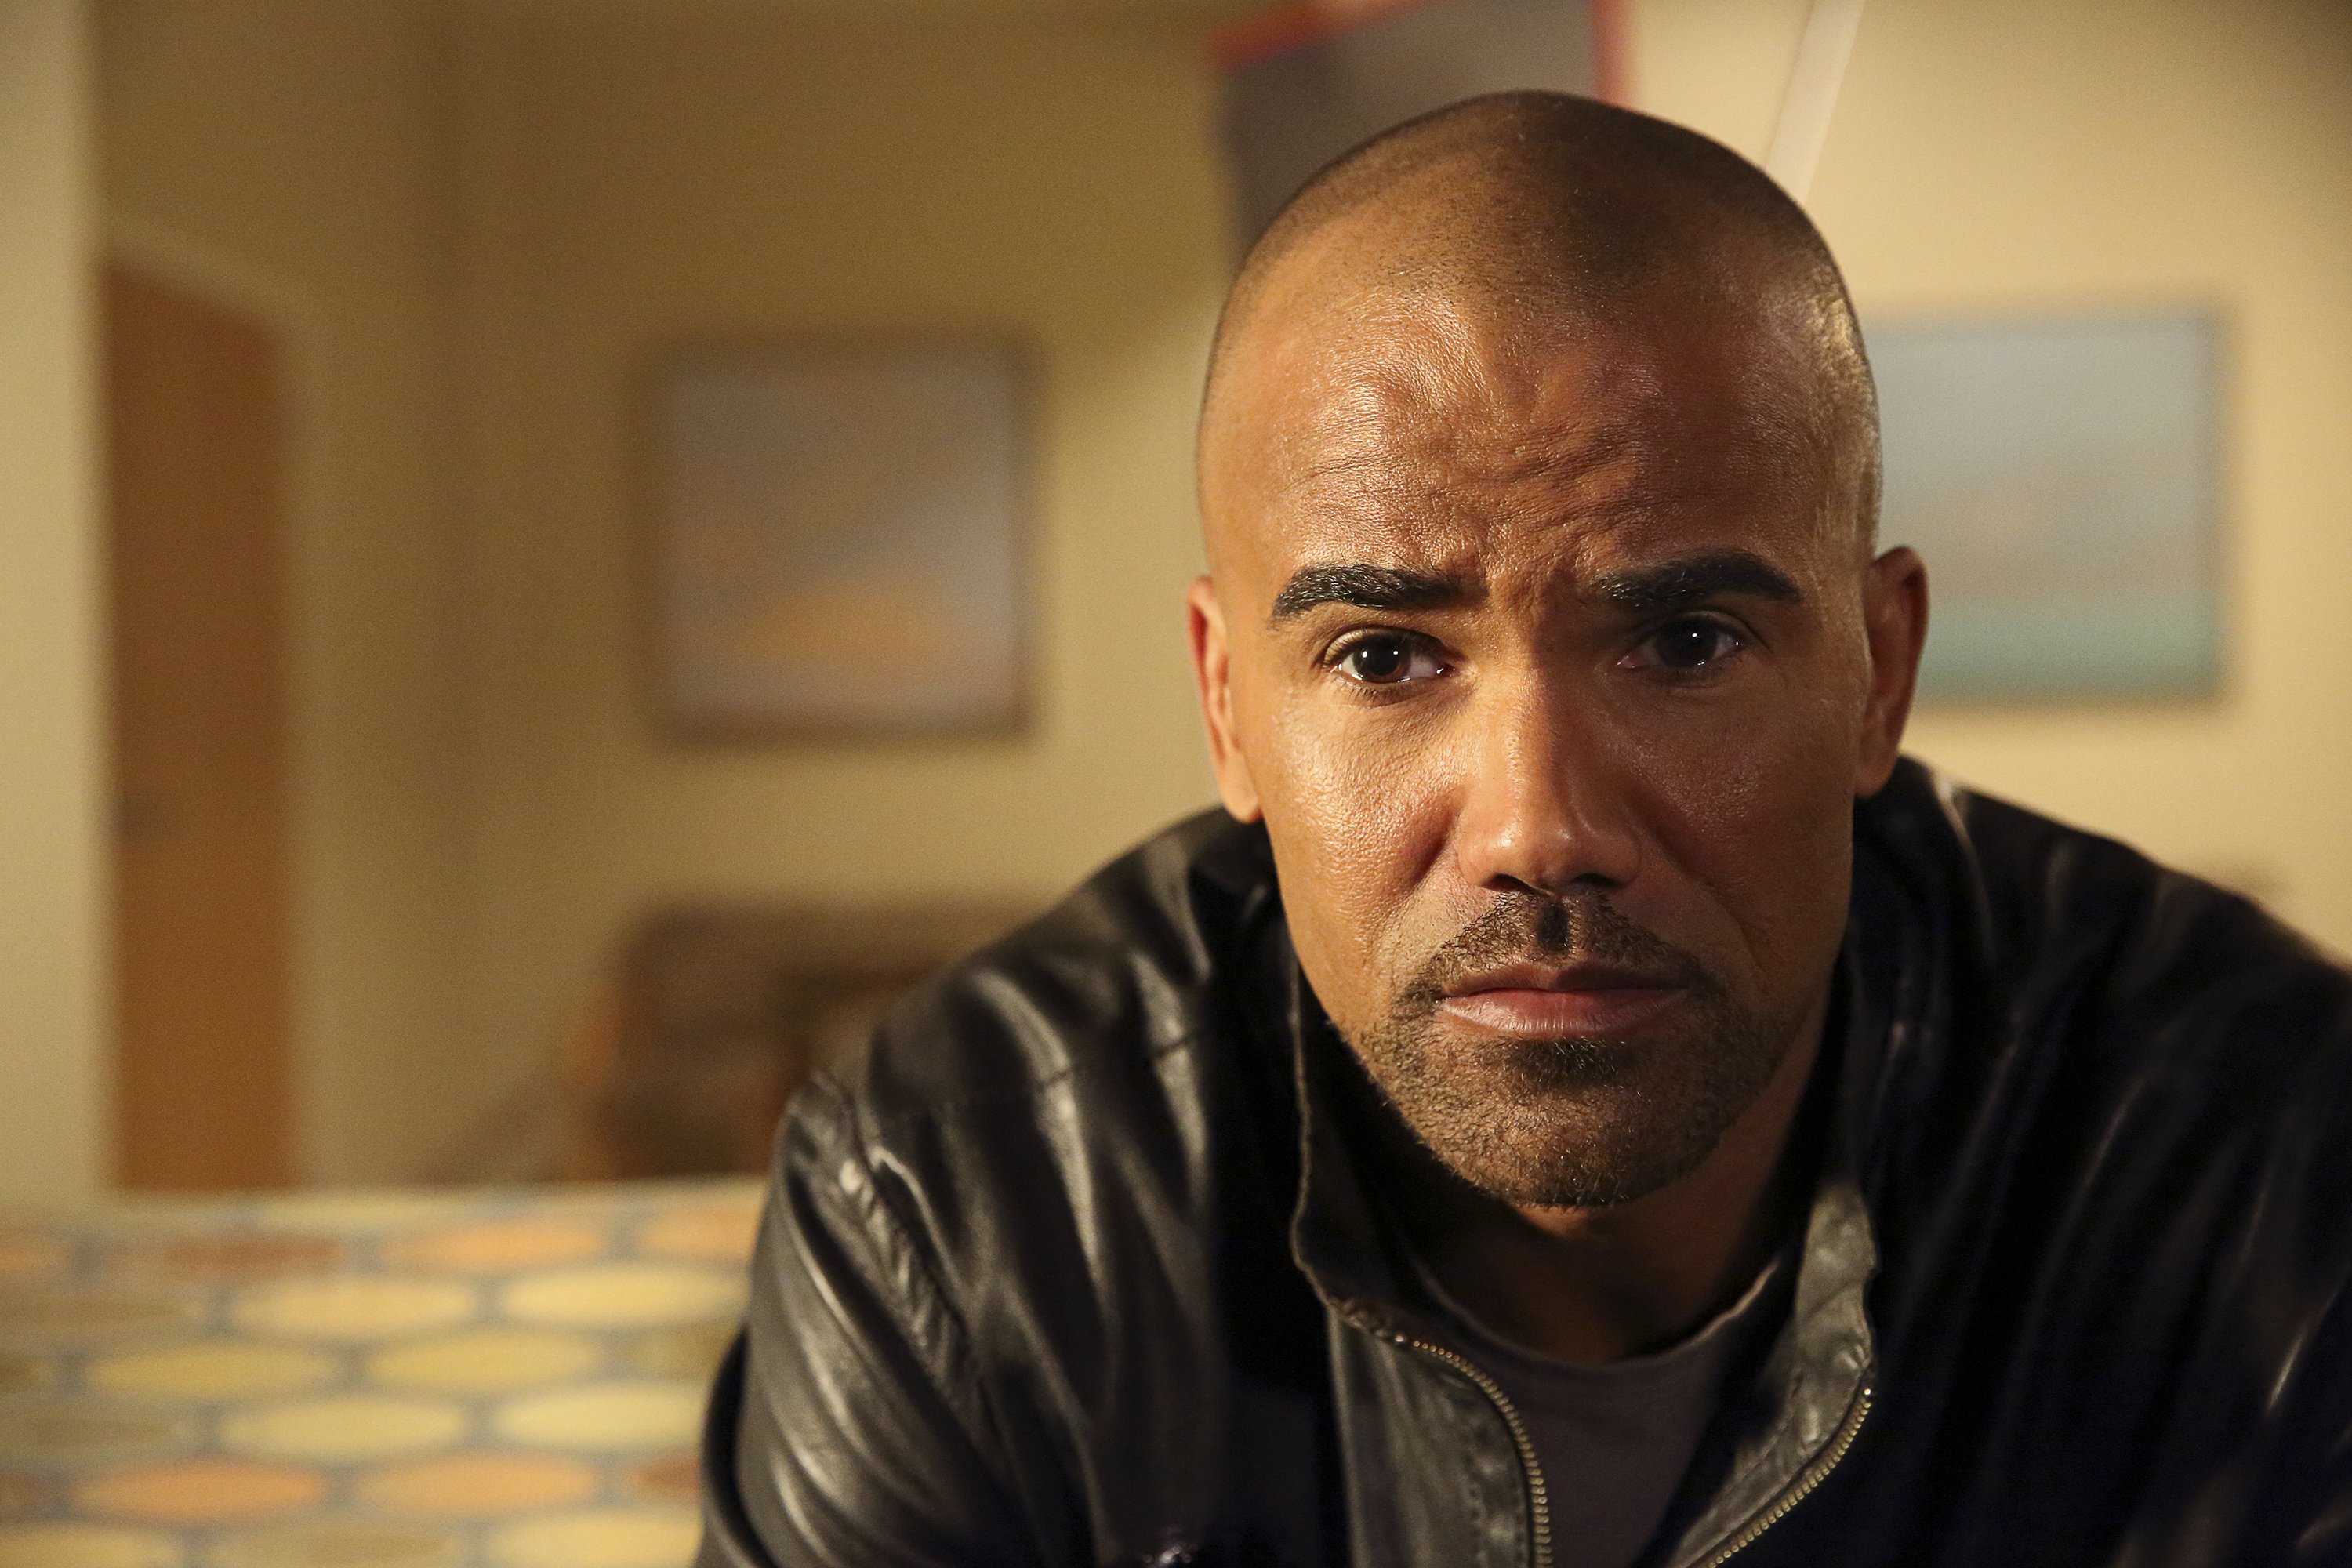 Shemar pictured on an episode of "Criminal Minds." | Photo: Getty Images